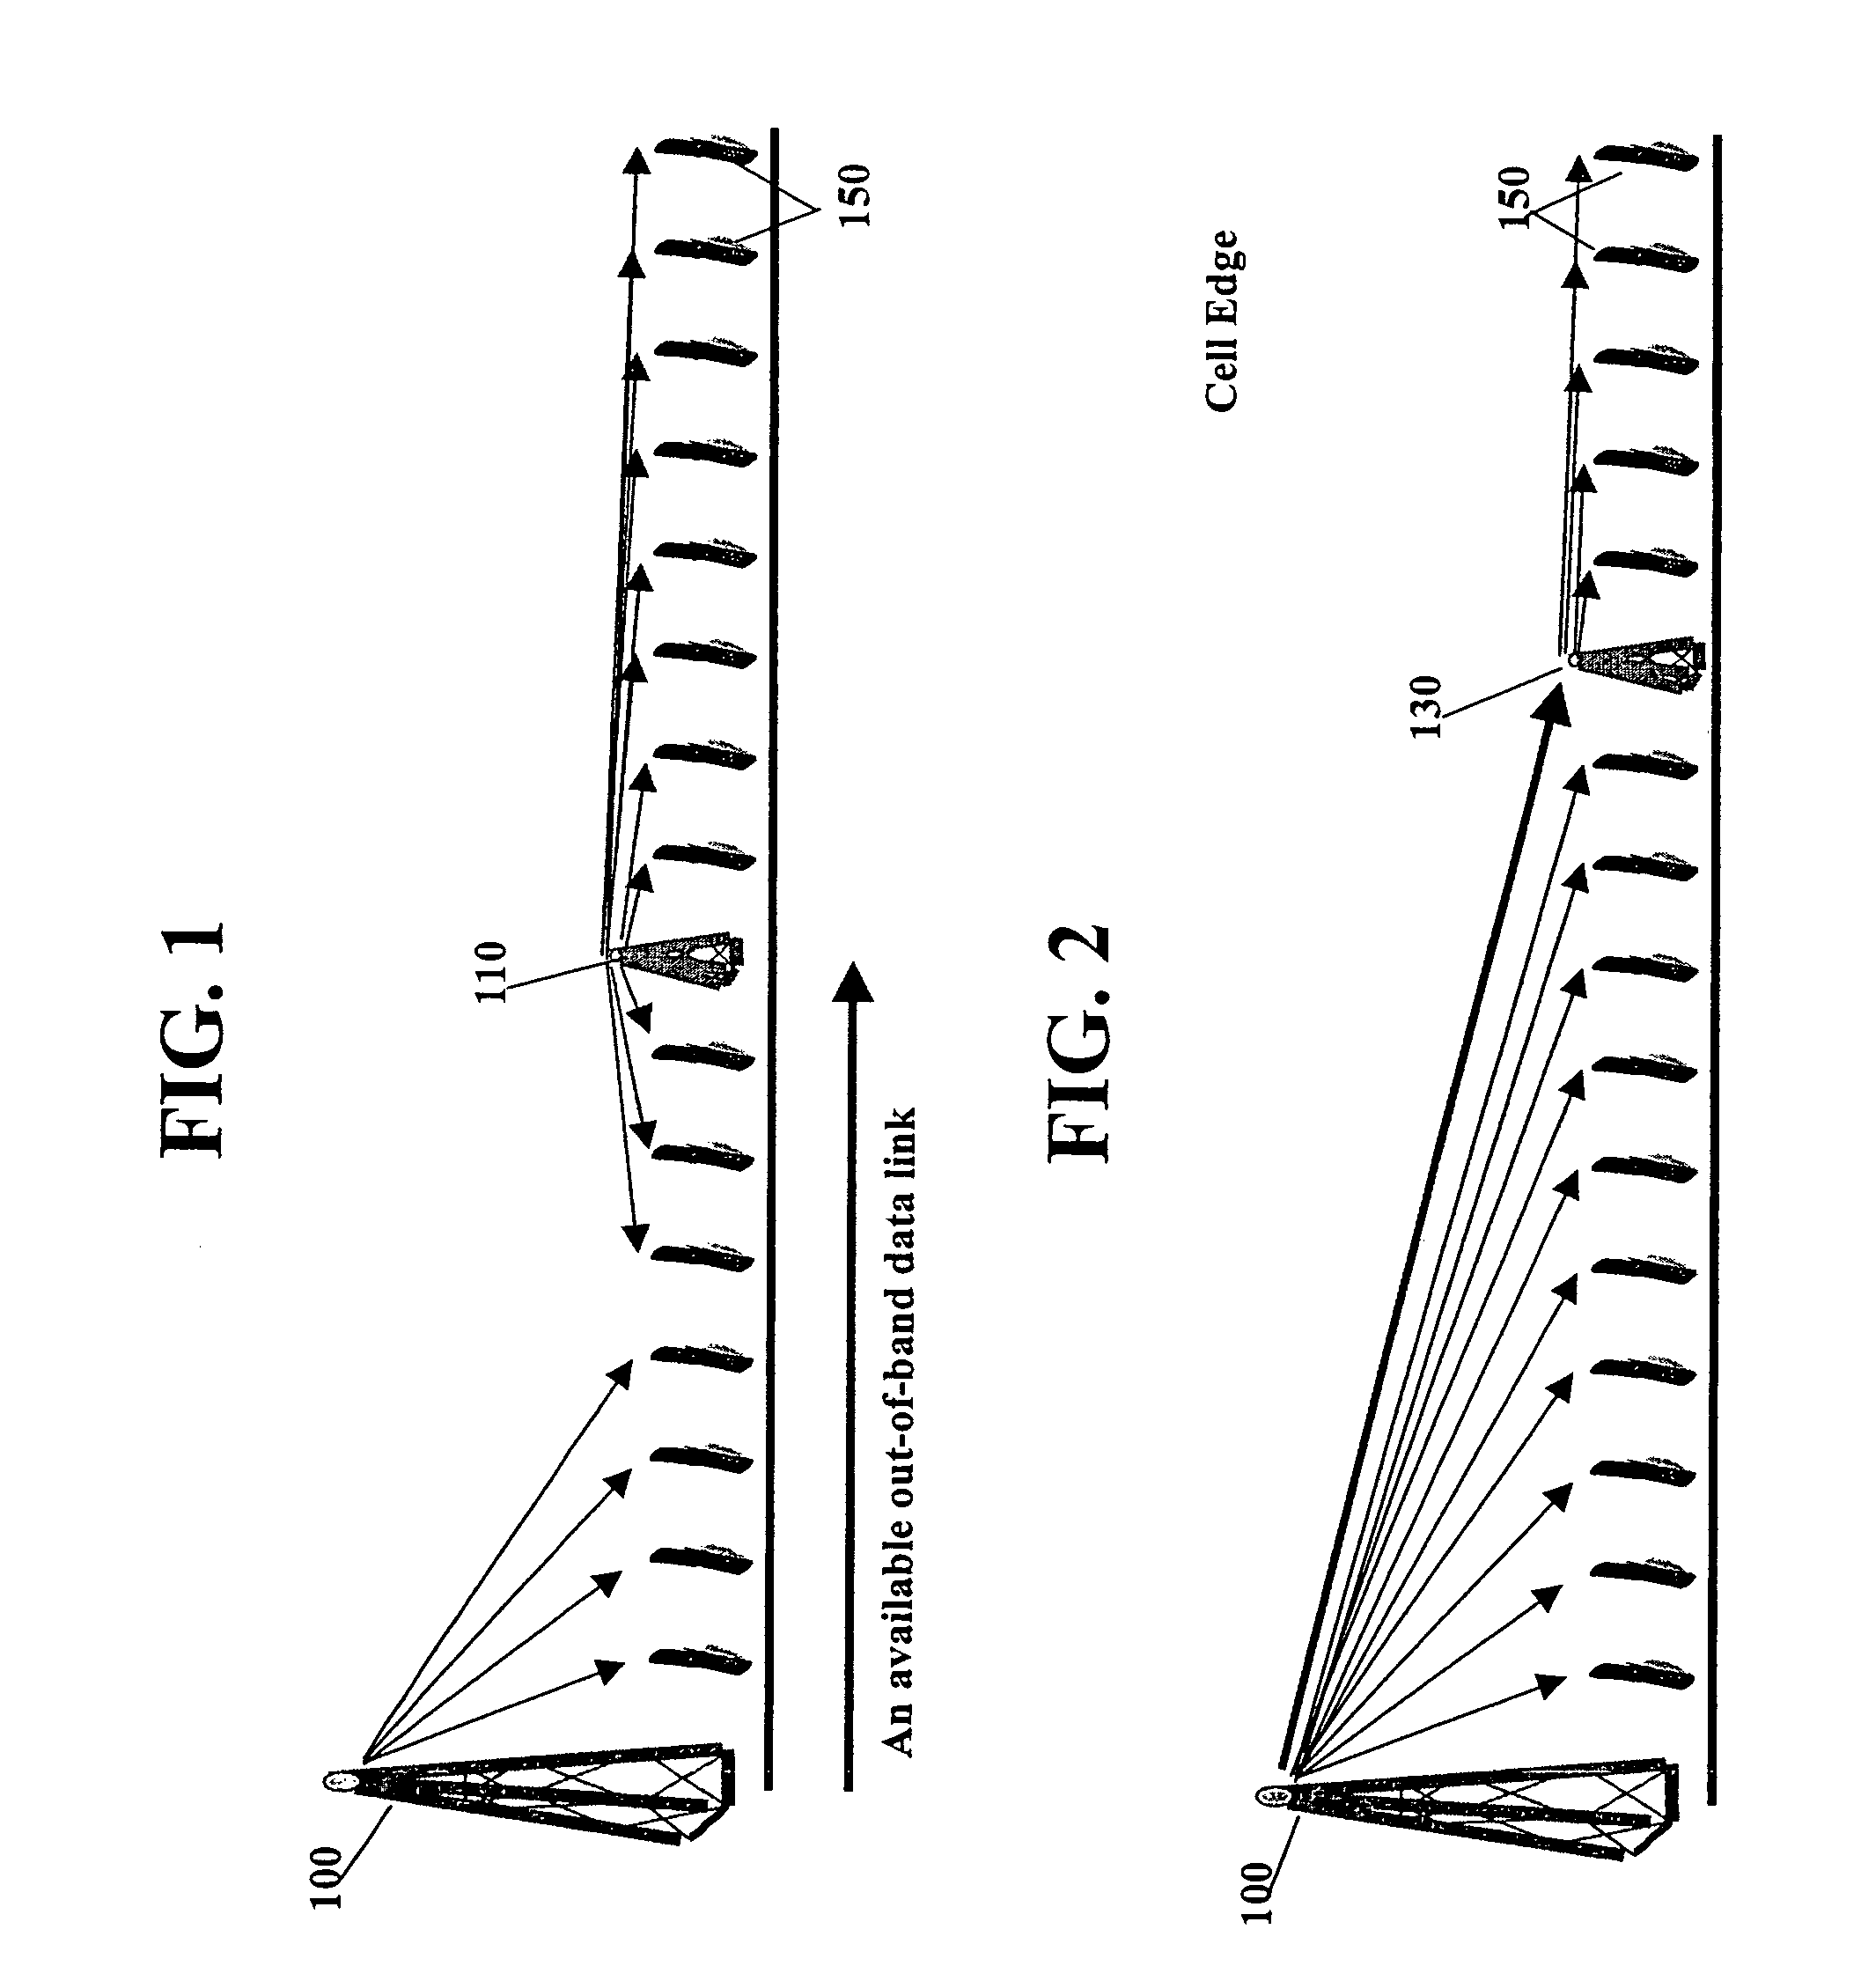 Method and system for a remote downlink transmitter for increasing the capacity and downlink capability of a multiple access interference limited spread-spectrum wireless network